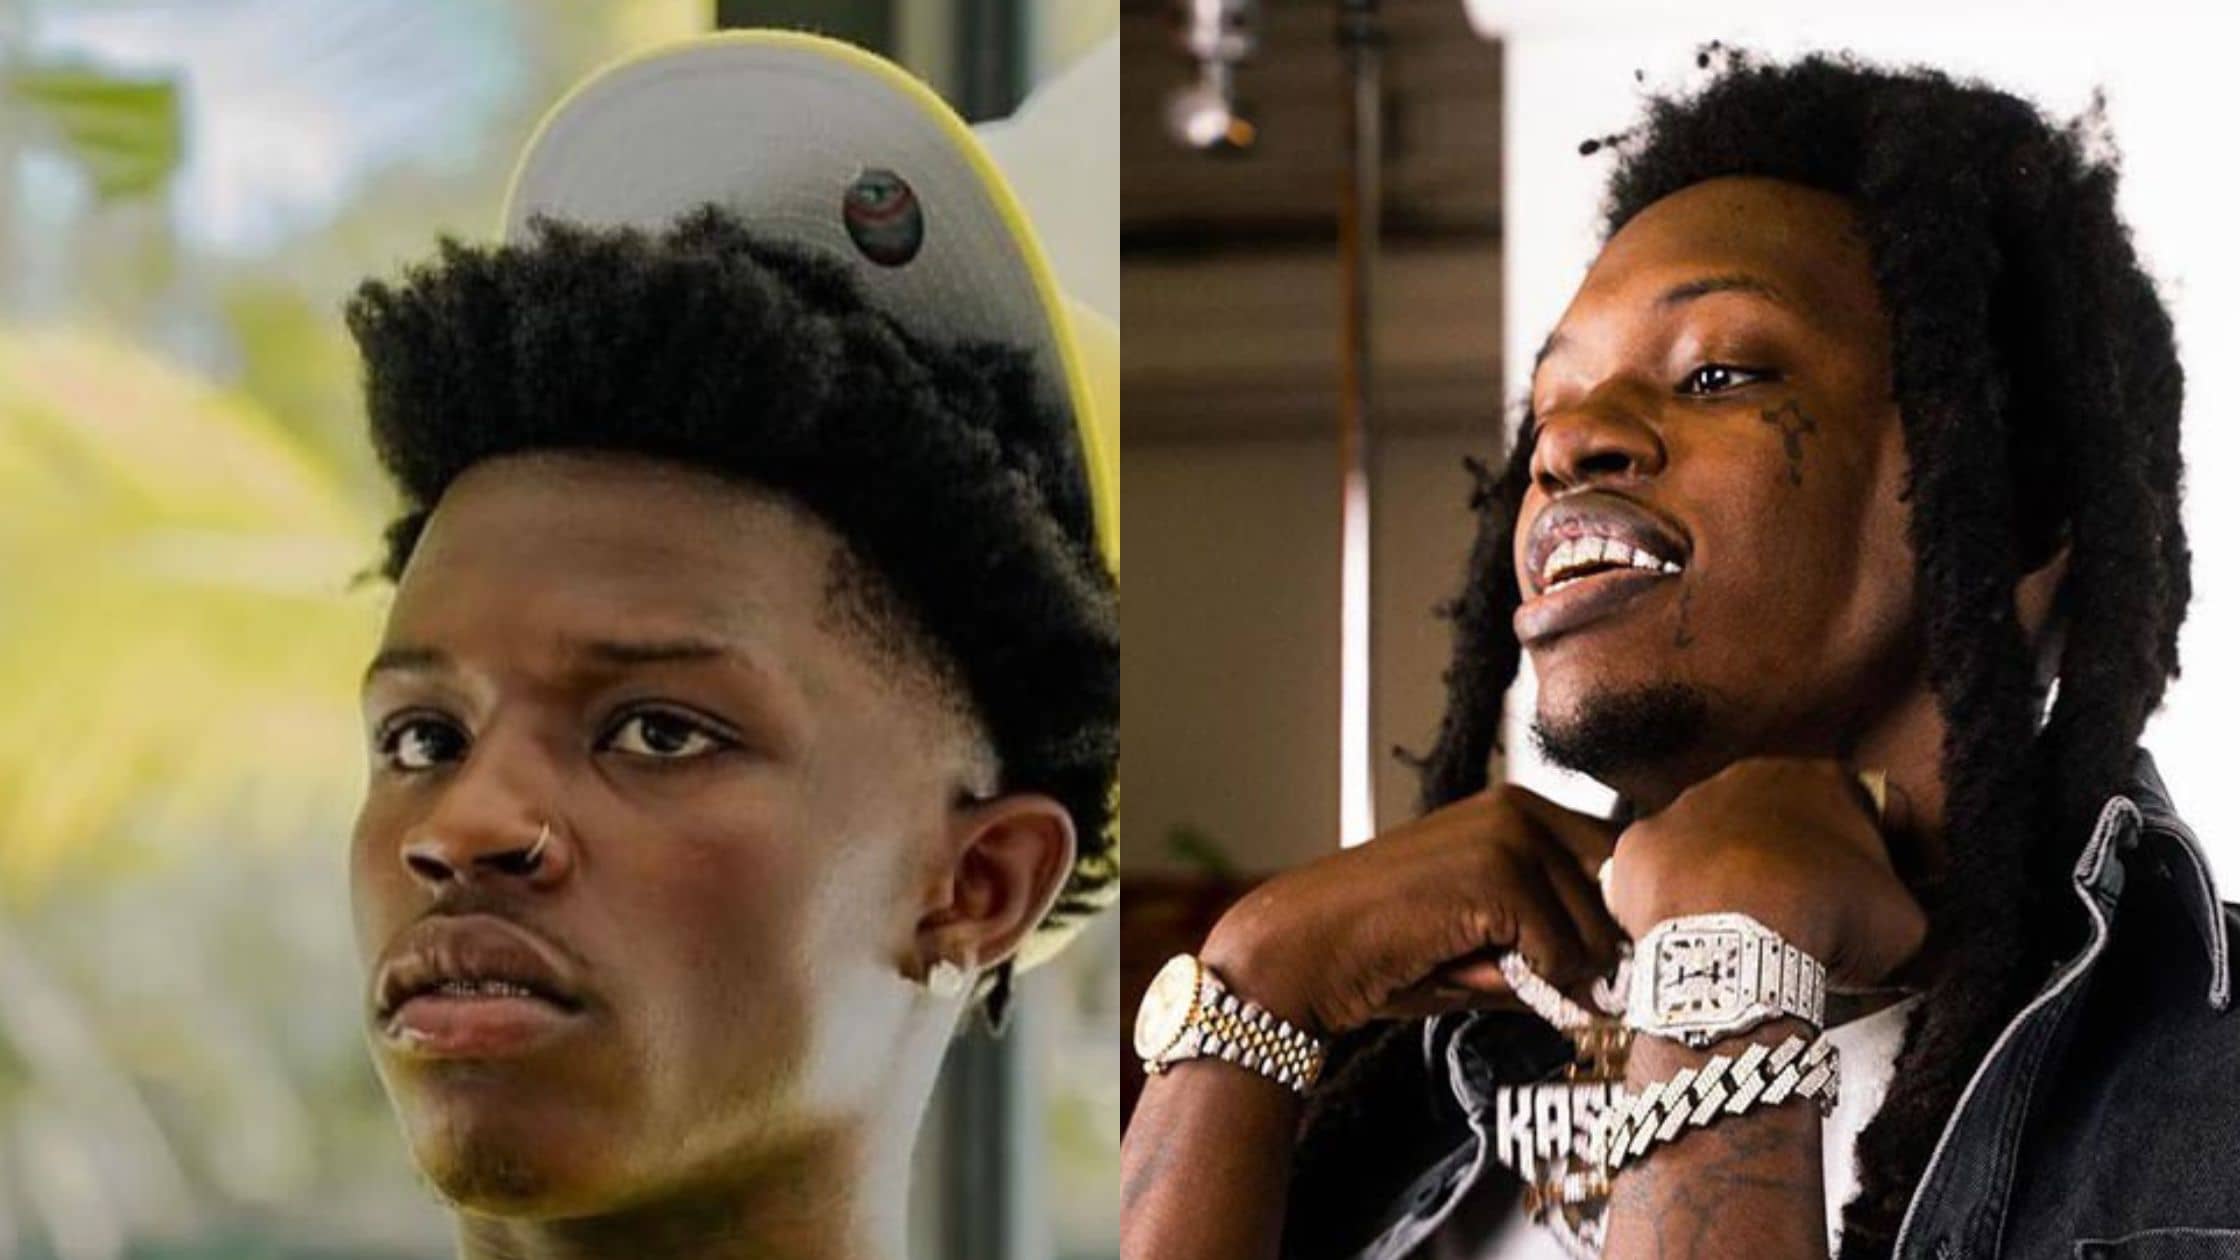 Rapper Foolio Reacts To Quando Rondo’s Comments About Quitting Gang Life: “It’s To Late For That”